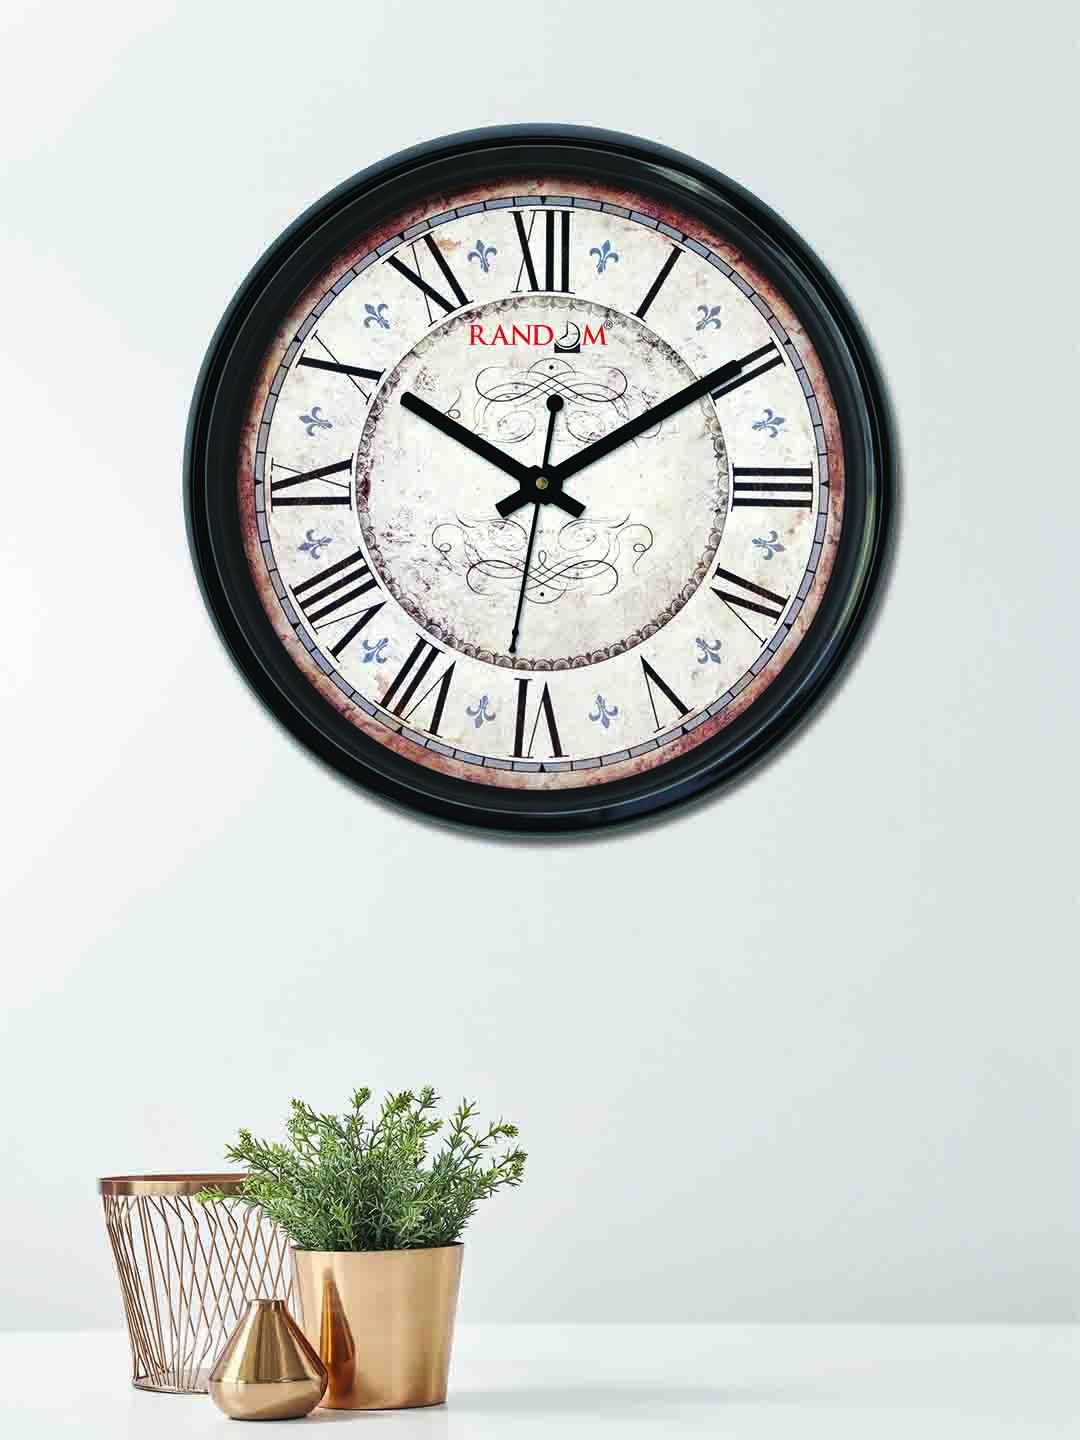 RANDOM Off-White & Peach-Coloured Round Printed 30 cm Analogue Wall Clock Price in India